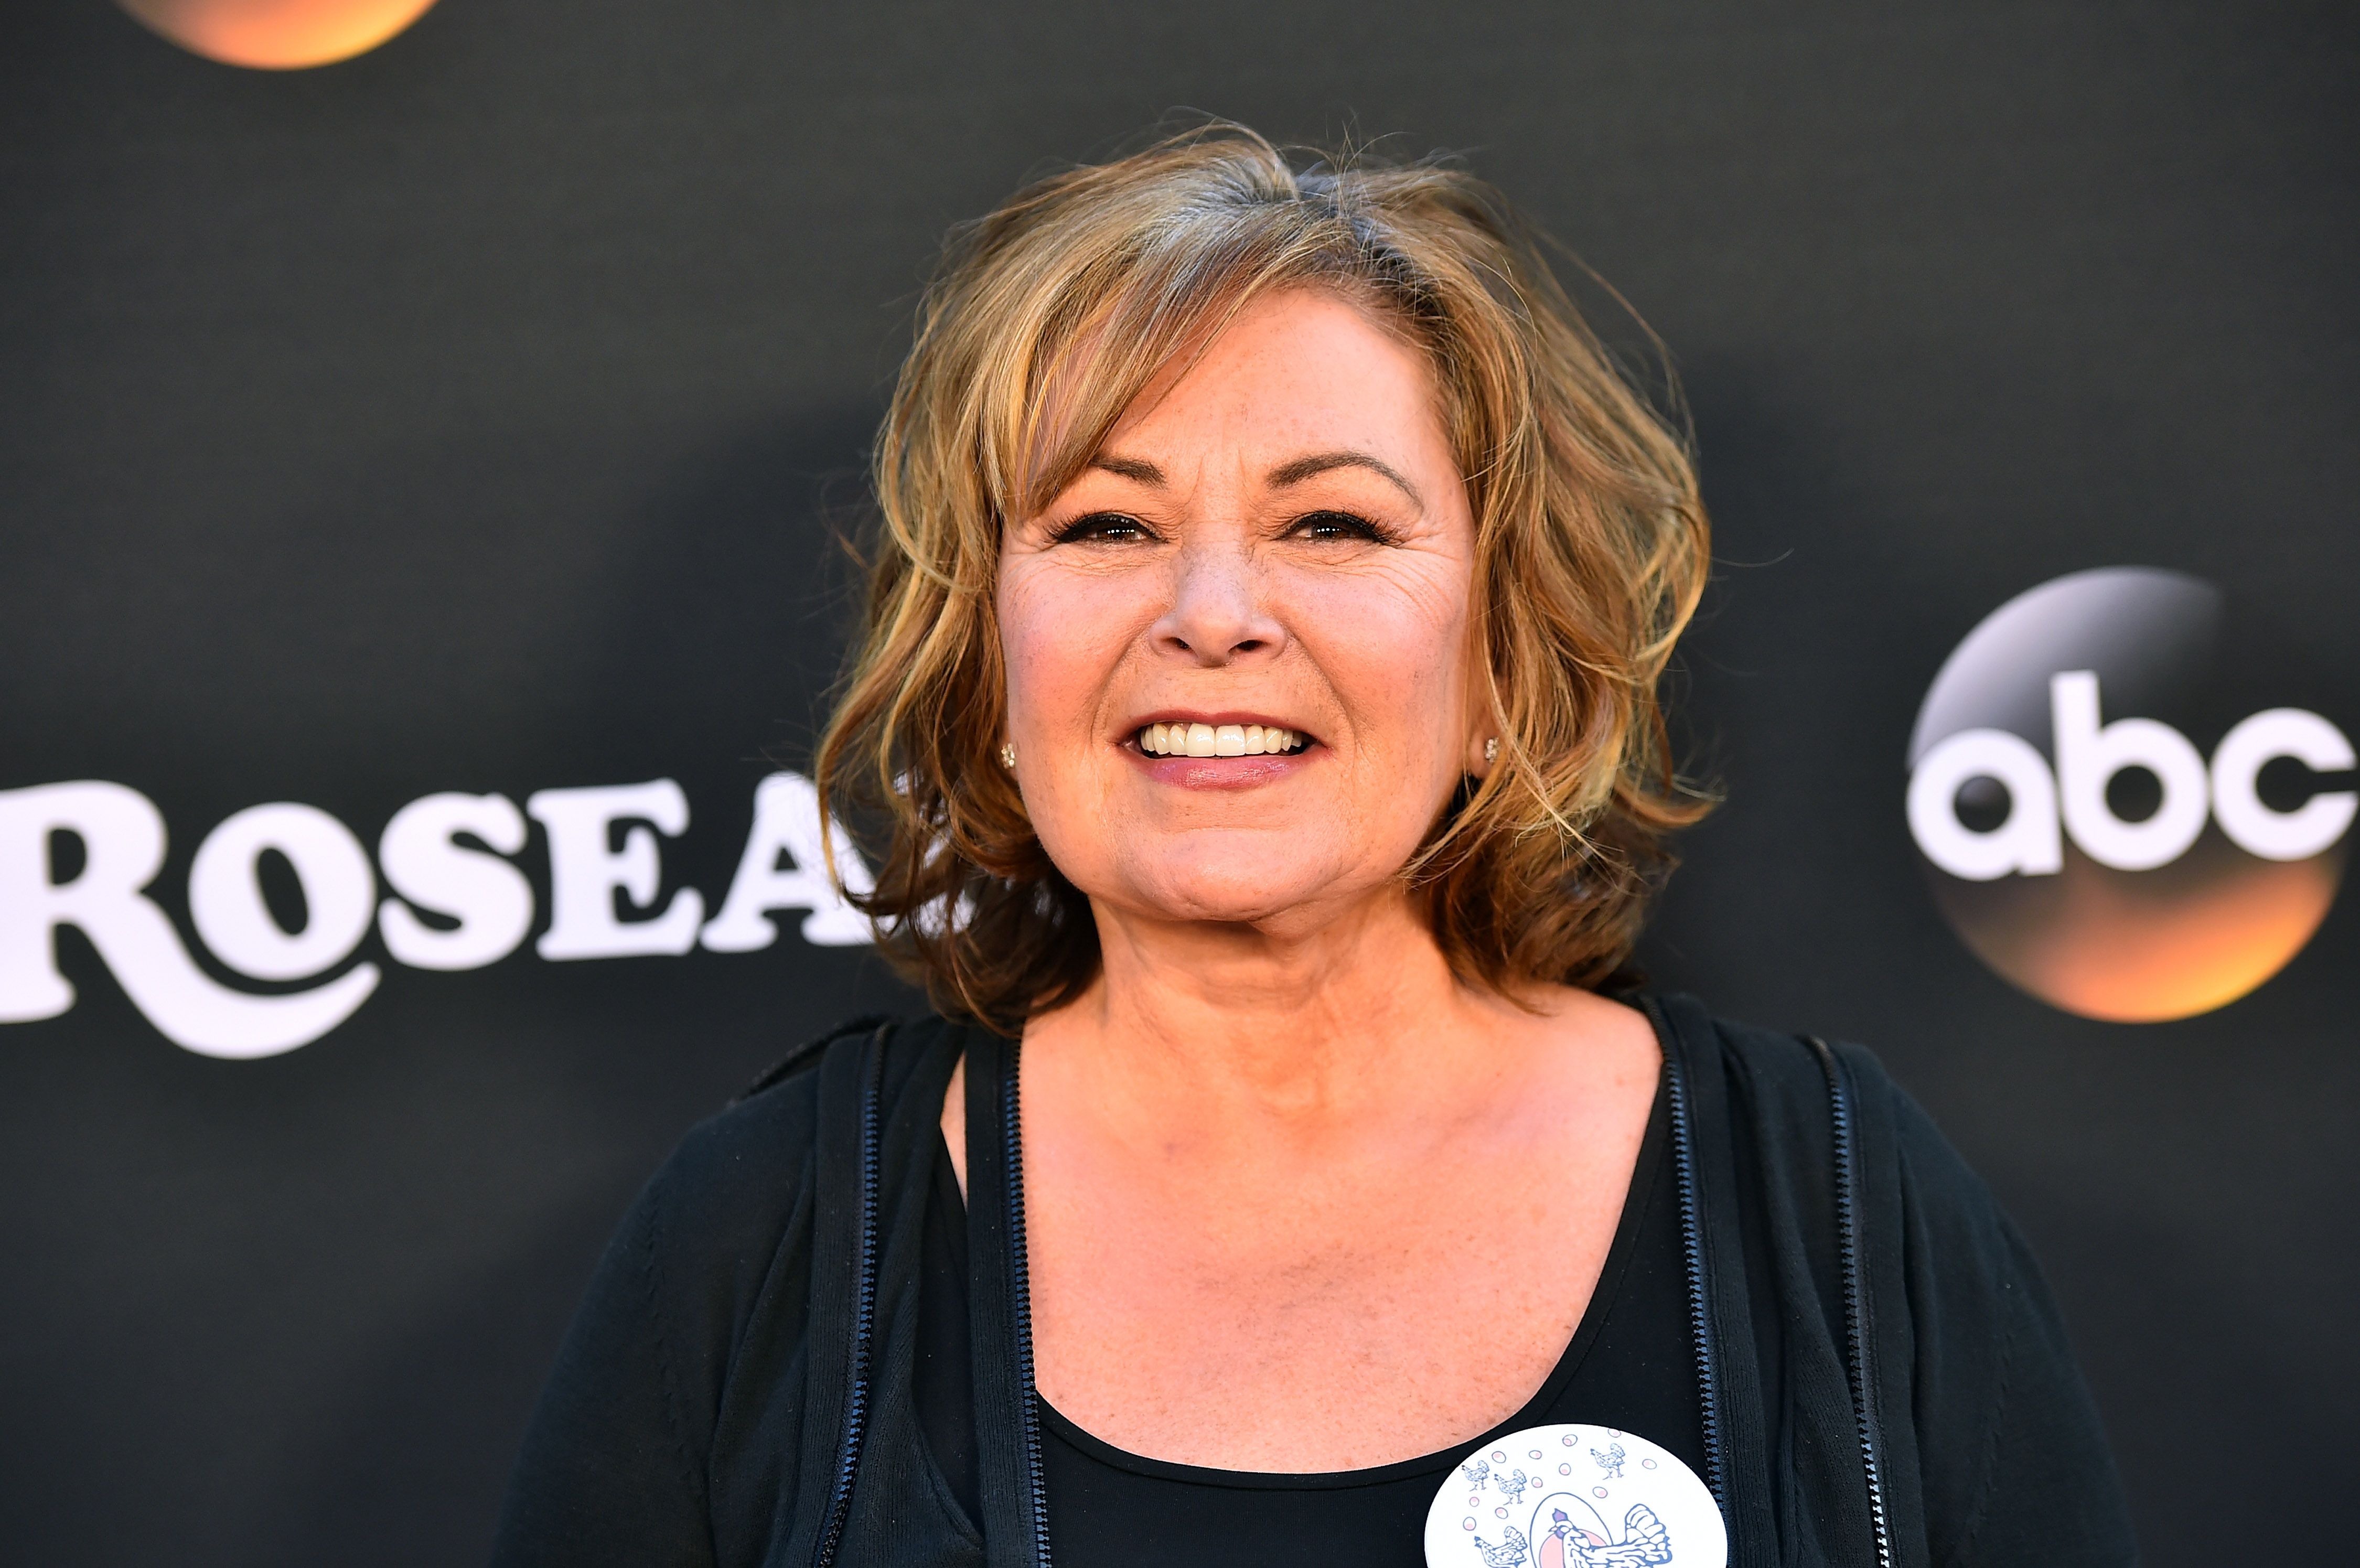 Roseanne Barr during the premiere of ABC's "Roseanne" at Walt Disney Studio Lot on March 23, 2018, in Burbank, California. | Source: Getty Images